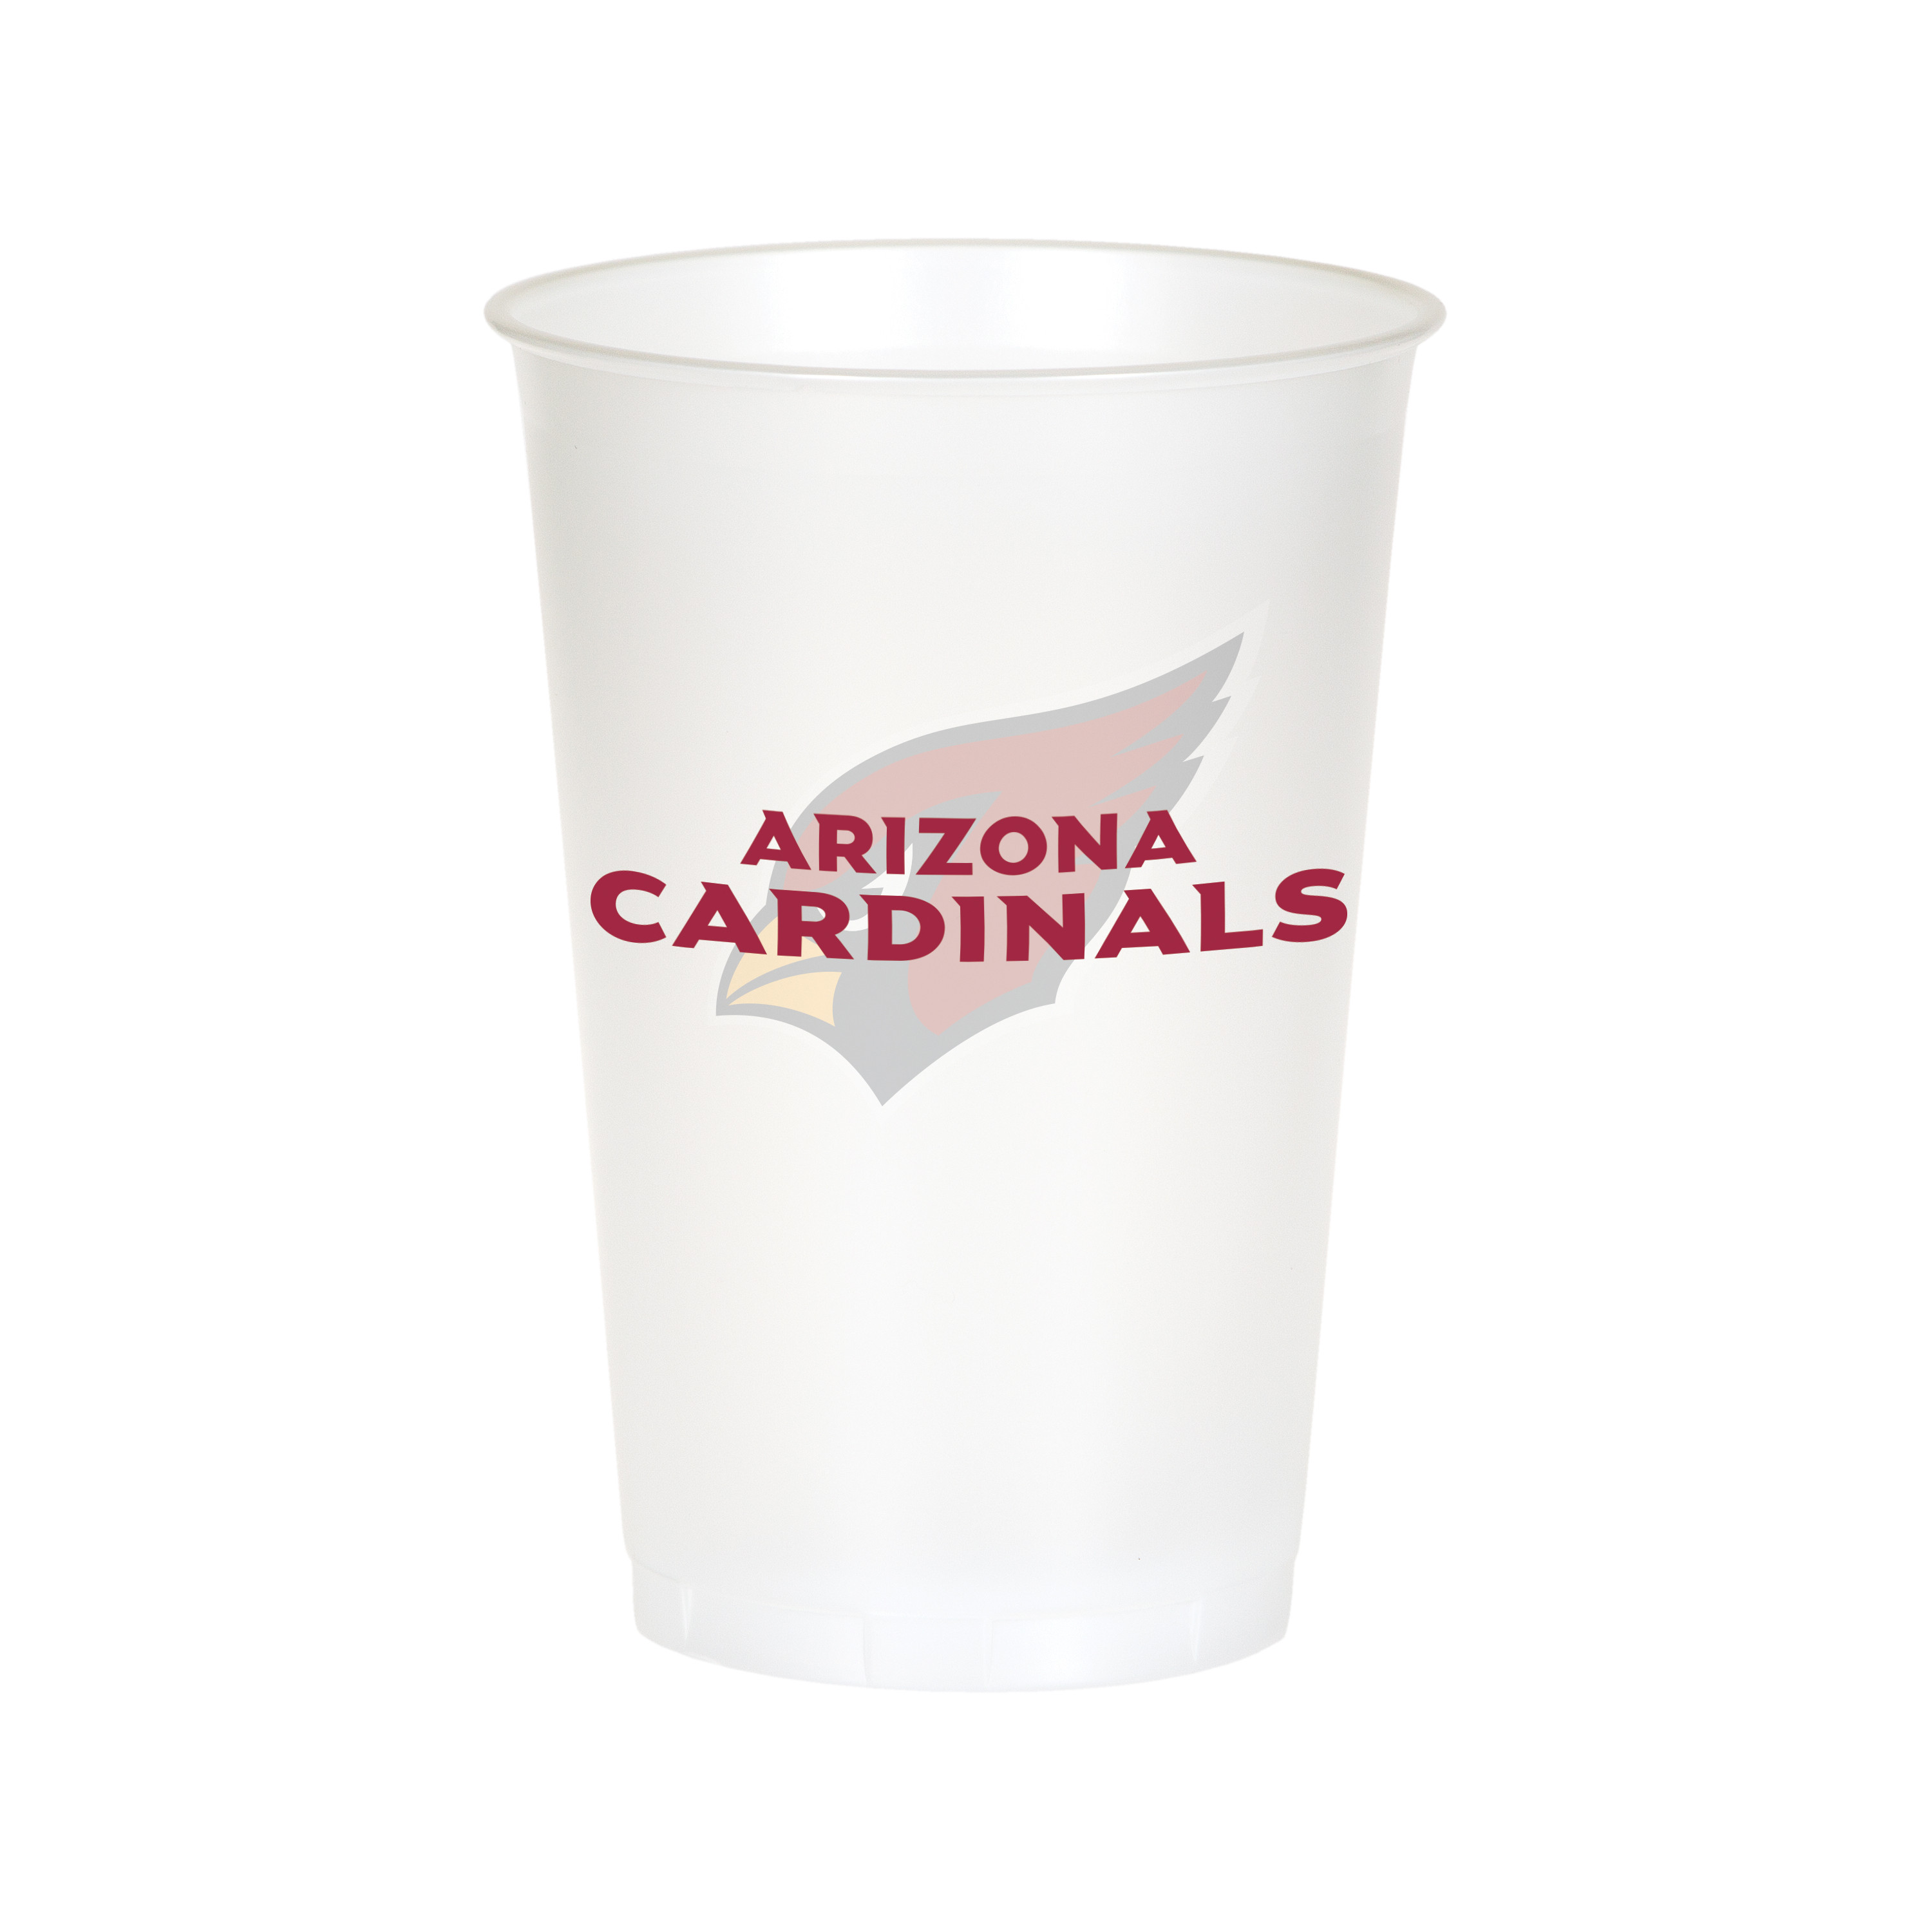 Arizona Cardinals Plastic Cups, 24 Count for 24 Guests - image 3 of 4